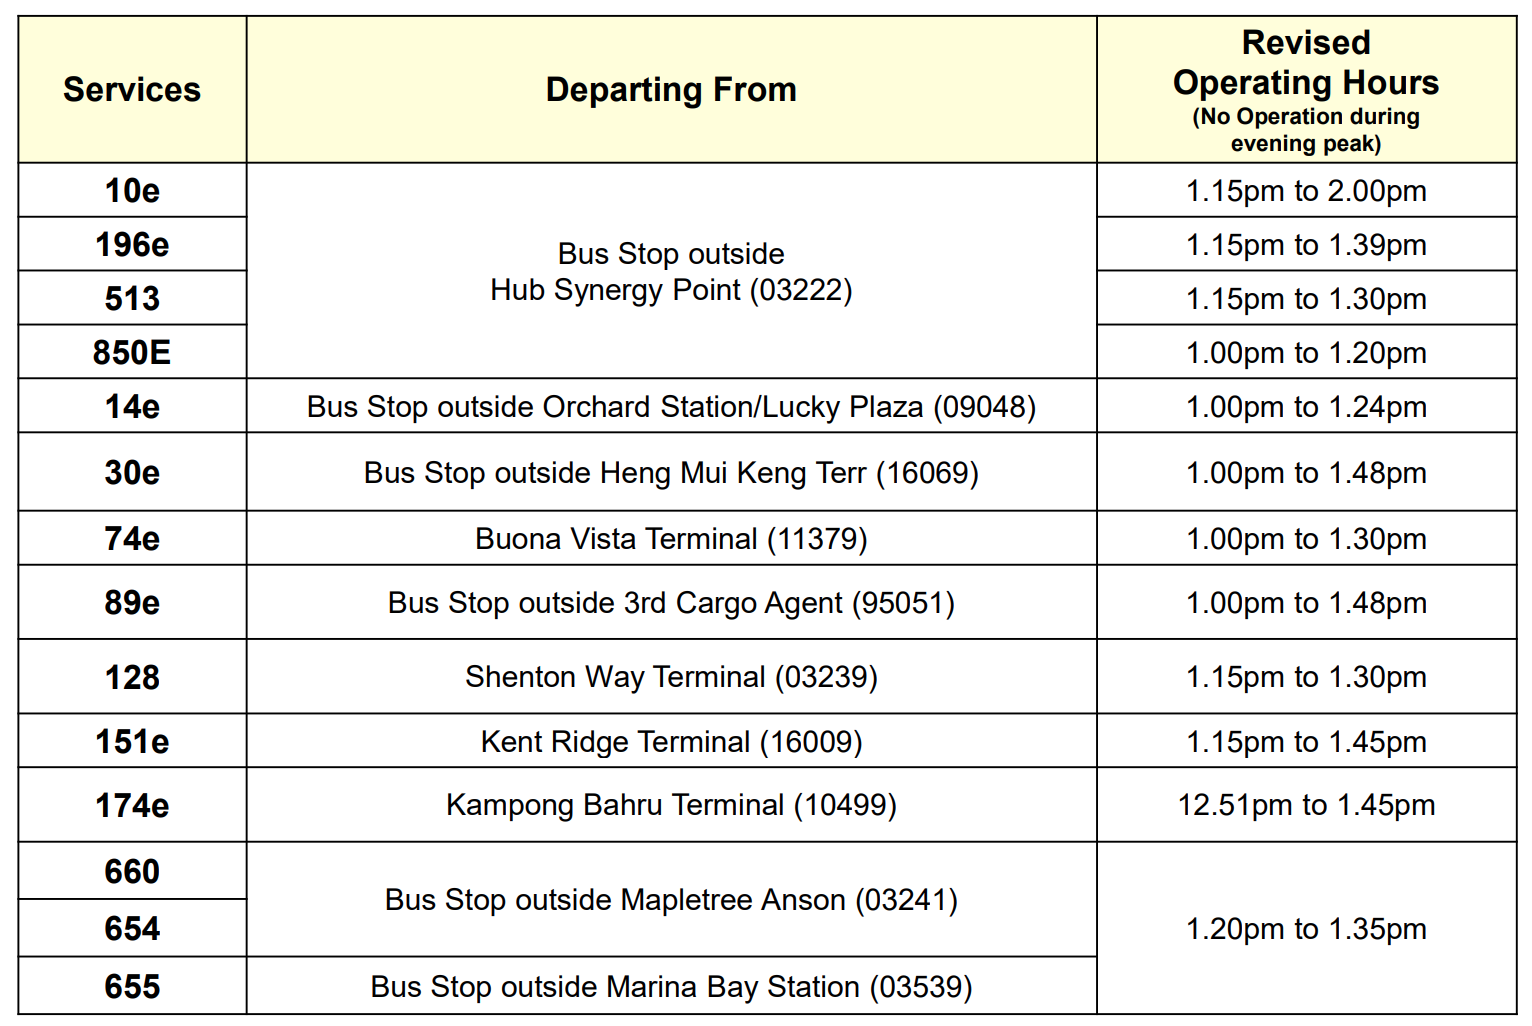 revised operating hours city bus new year's eve 2019 2020